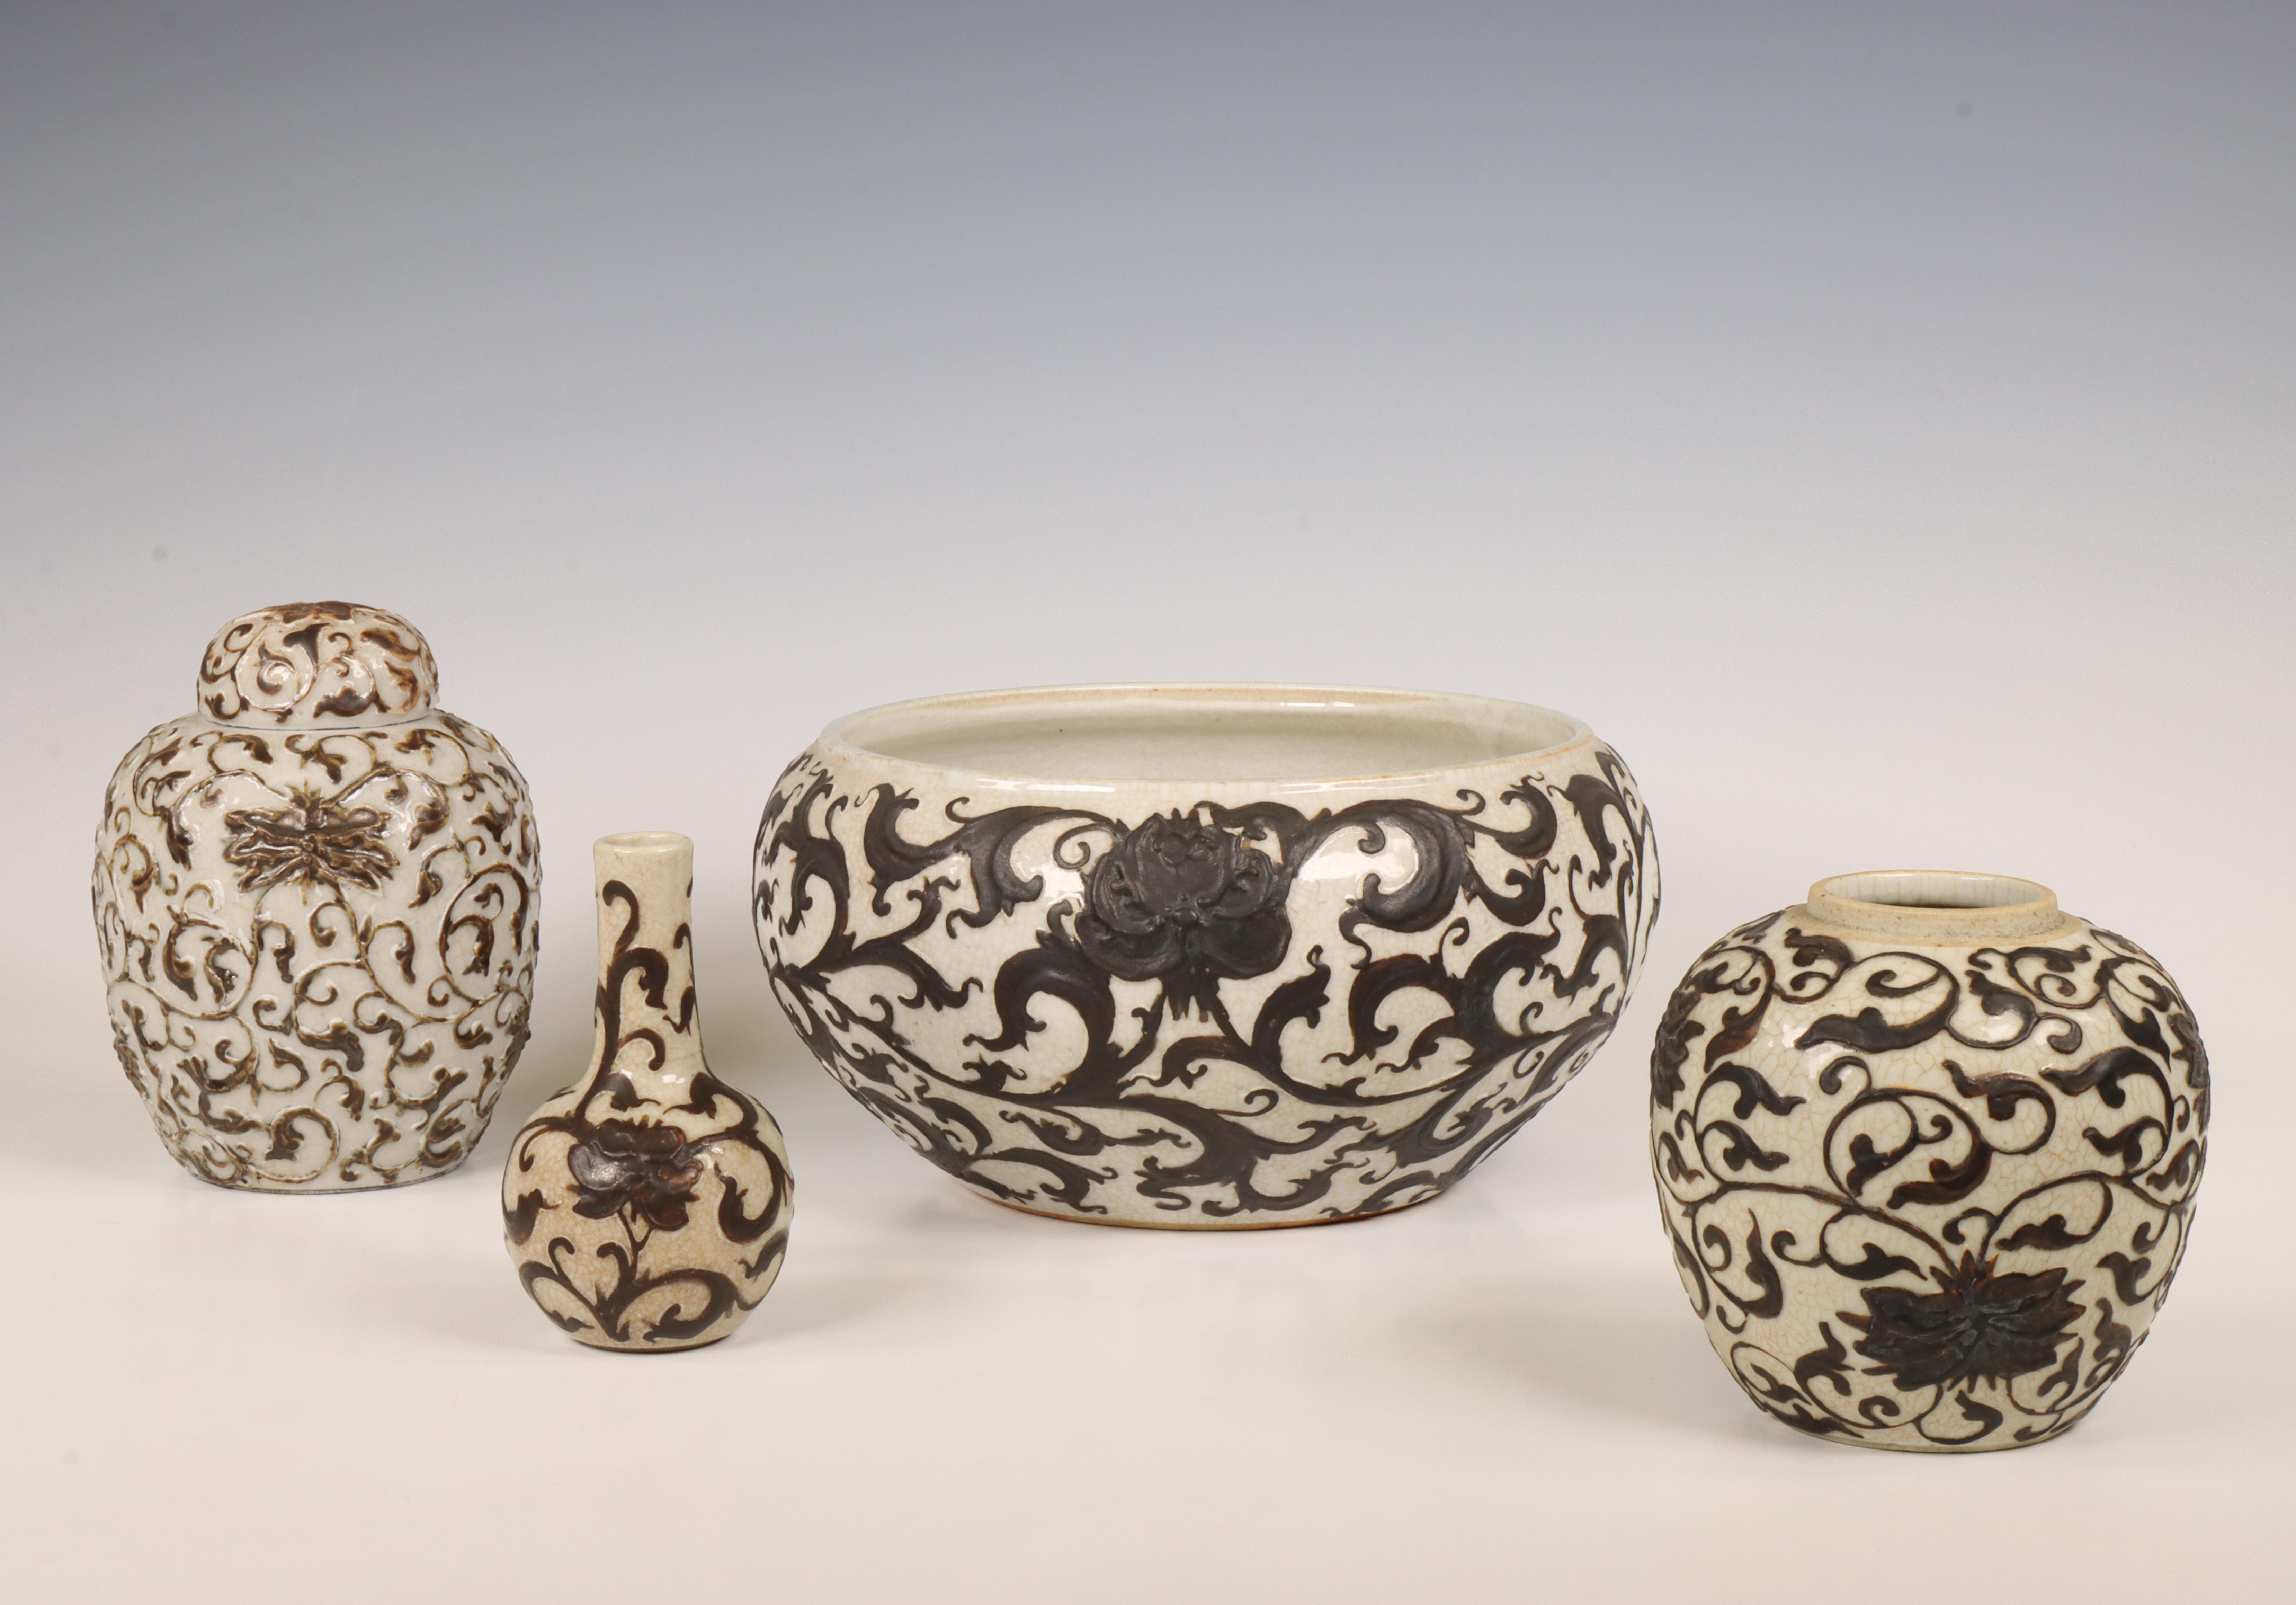 China, a small collection of crackle-glazed 'lotus' vases and bowls, 19th century,